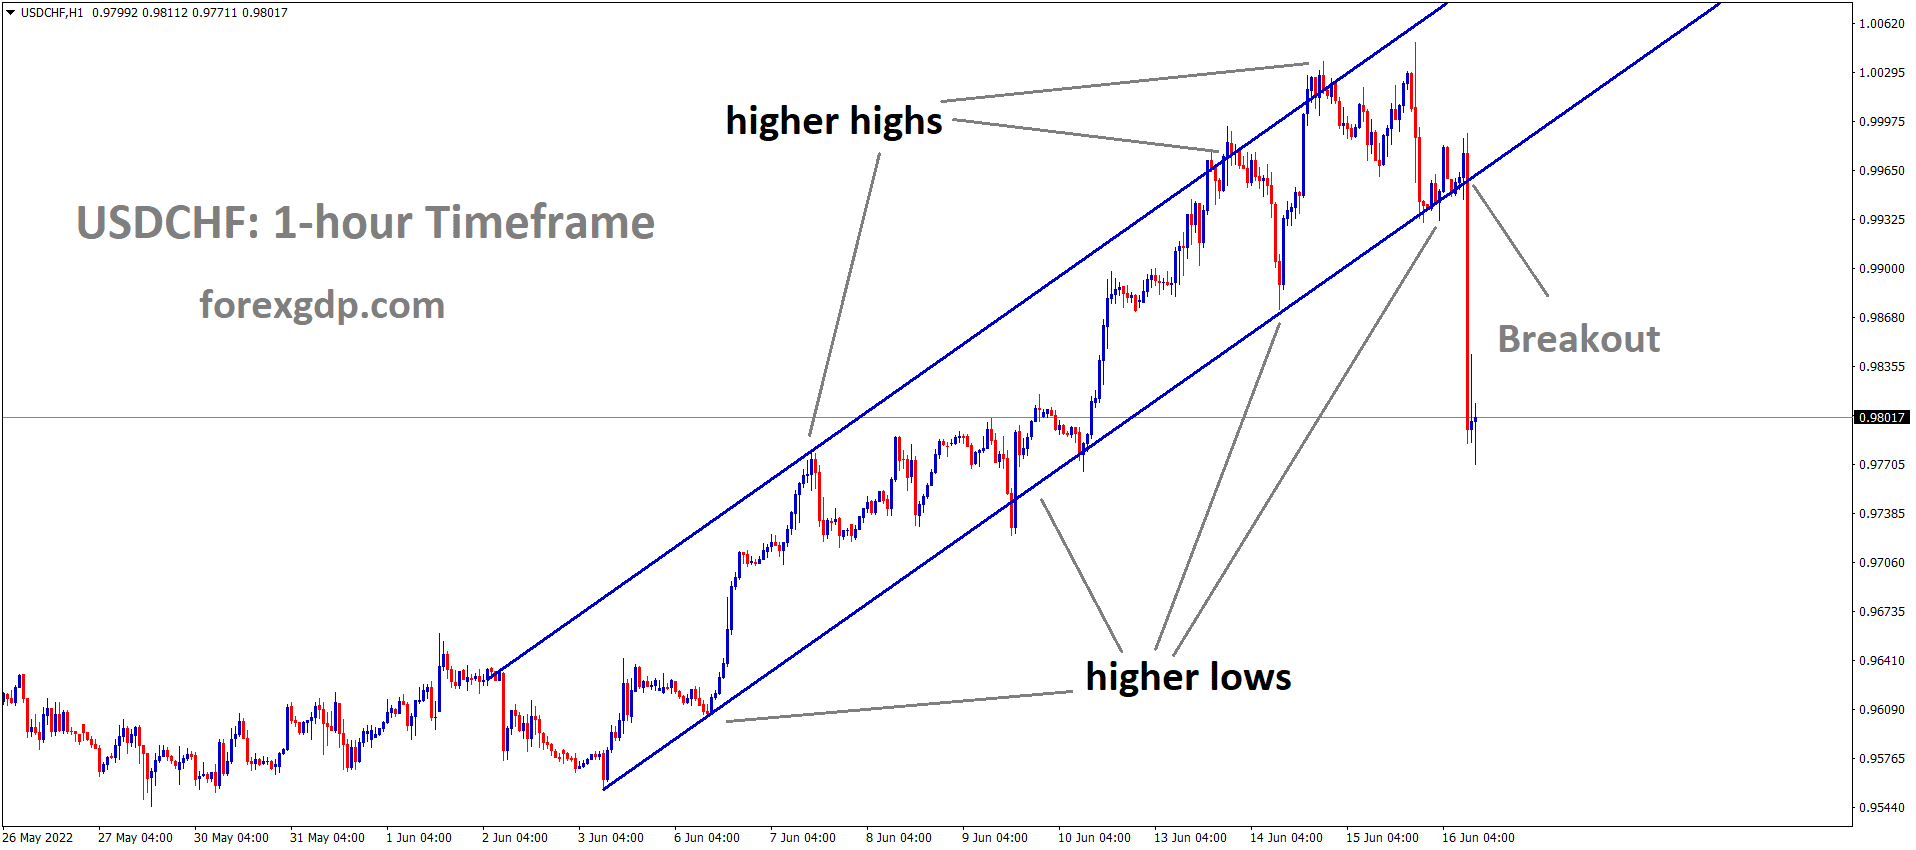 USDCHF has broken the higher low area of the Ascending channel.